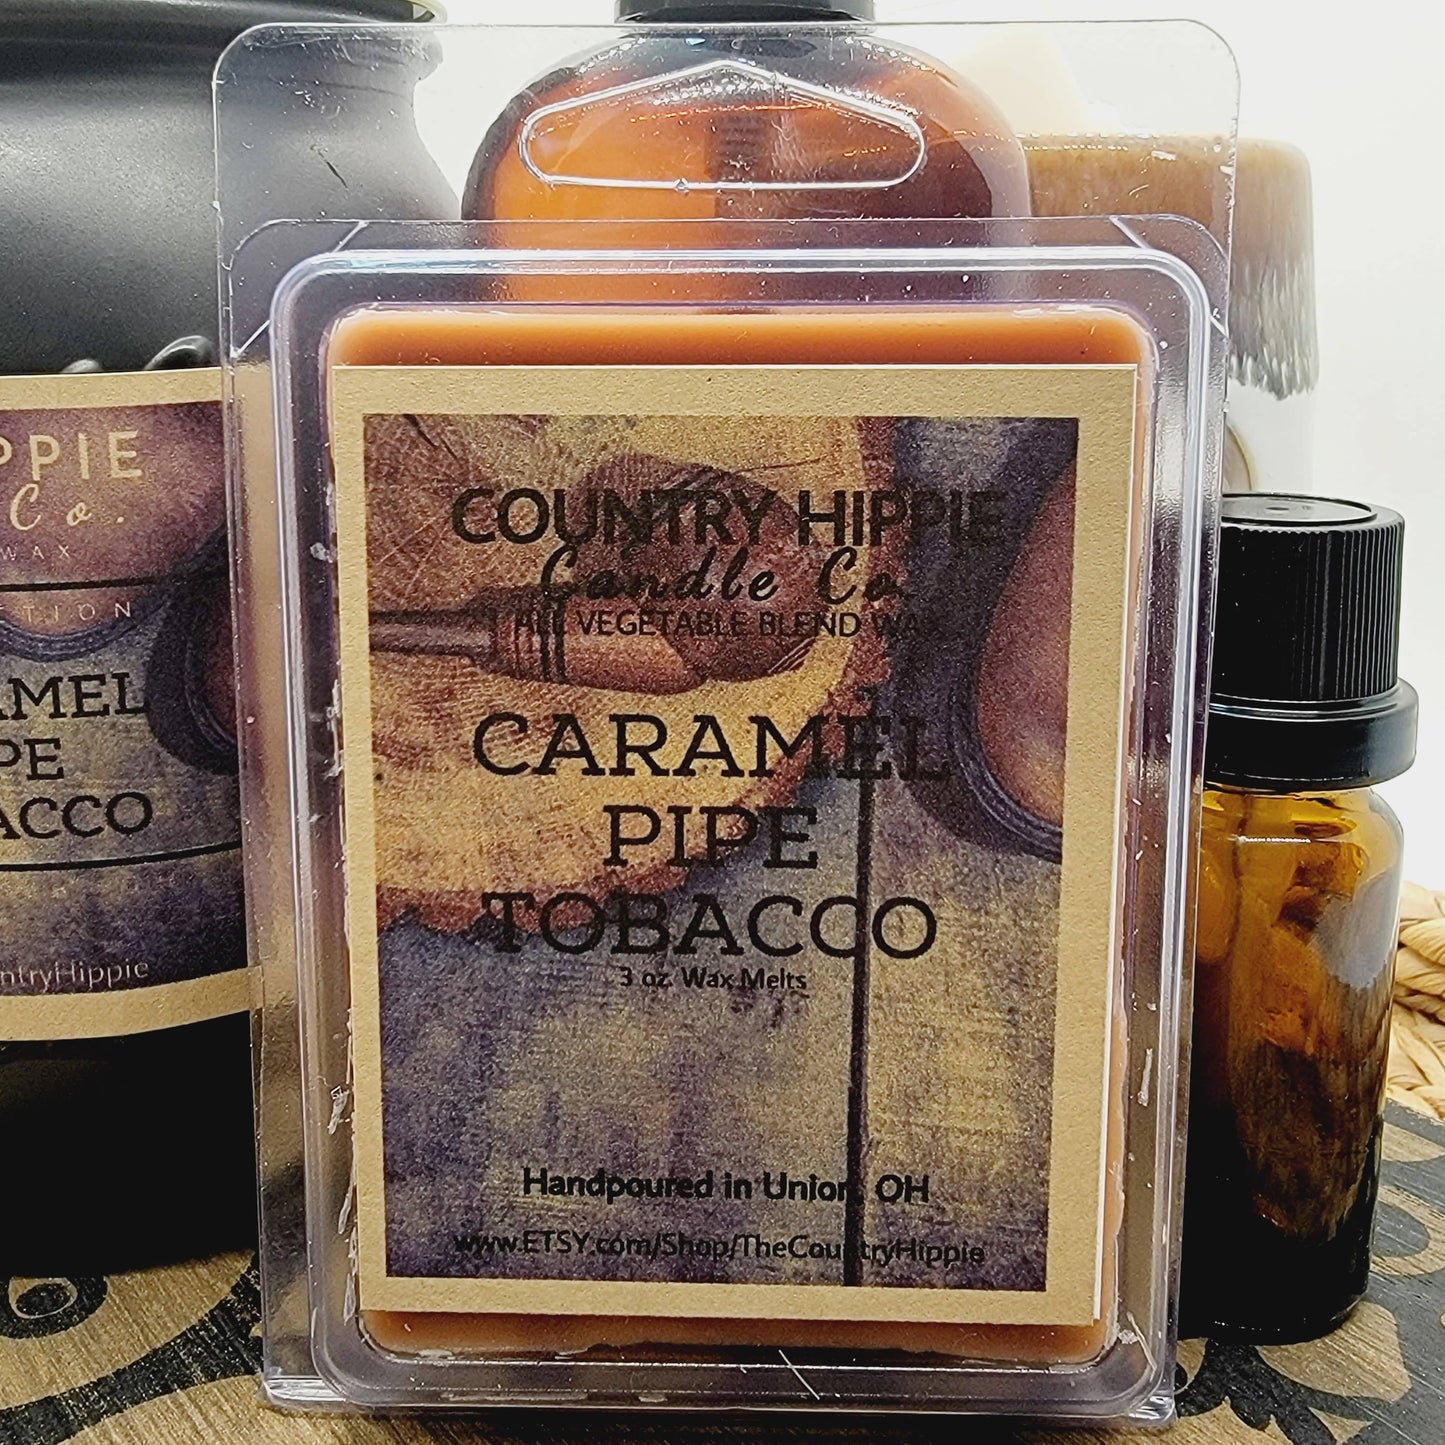 Country Hippie Co. - Caramel Pipe Tobacco Wax Melts 3 oz